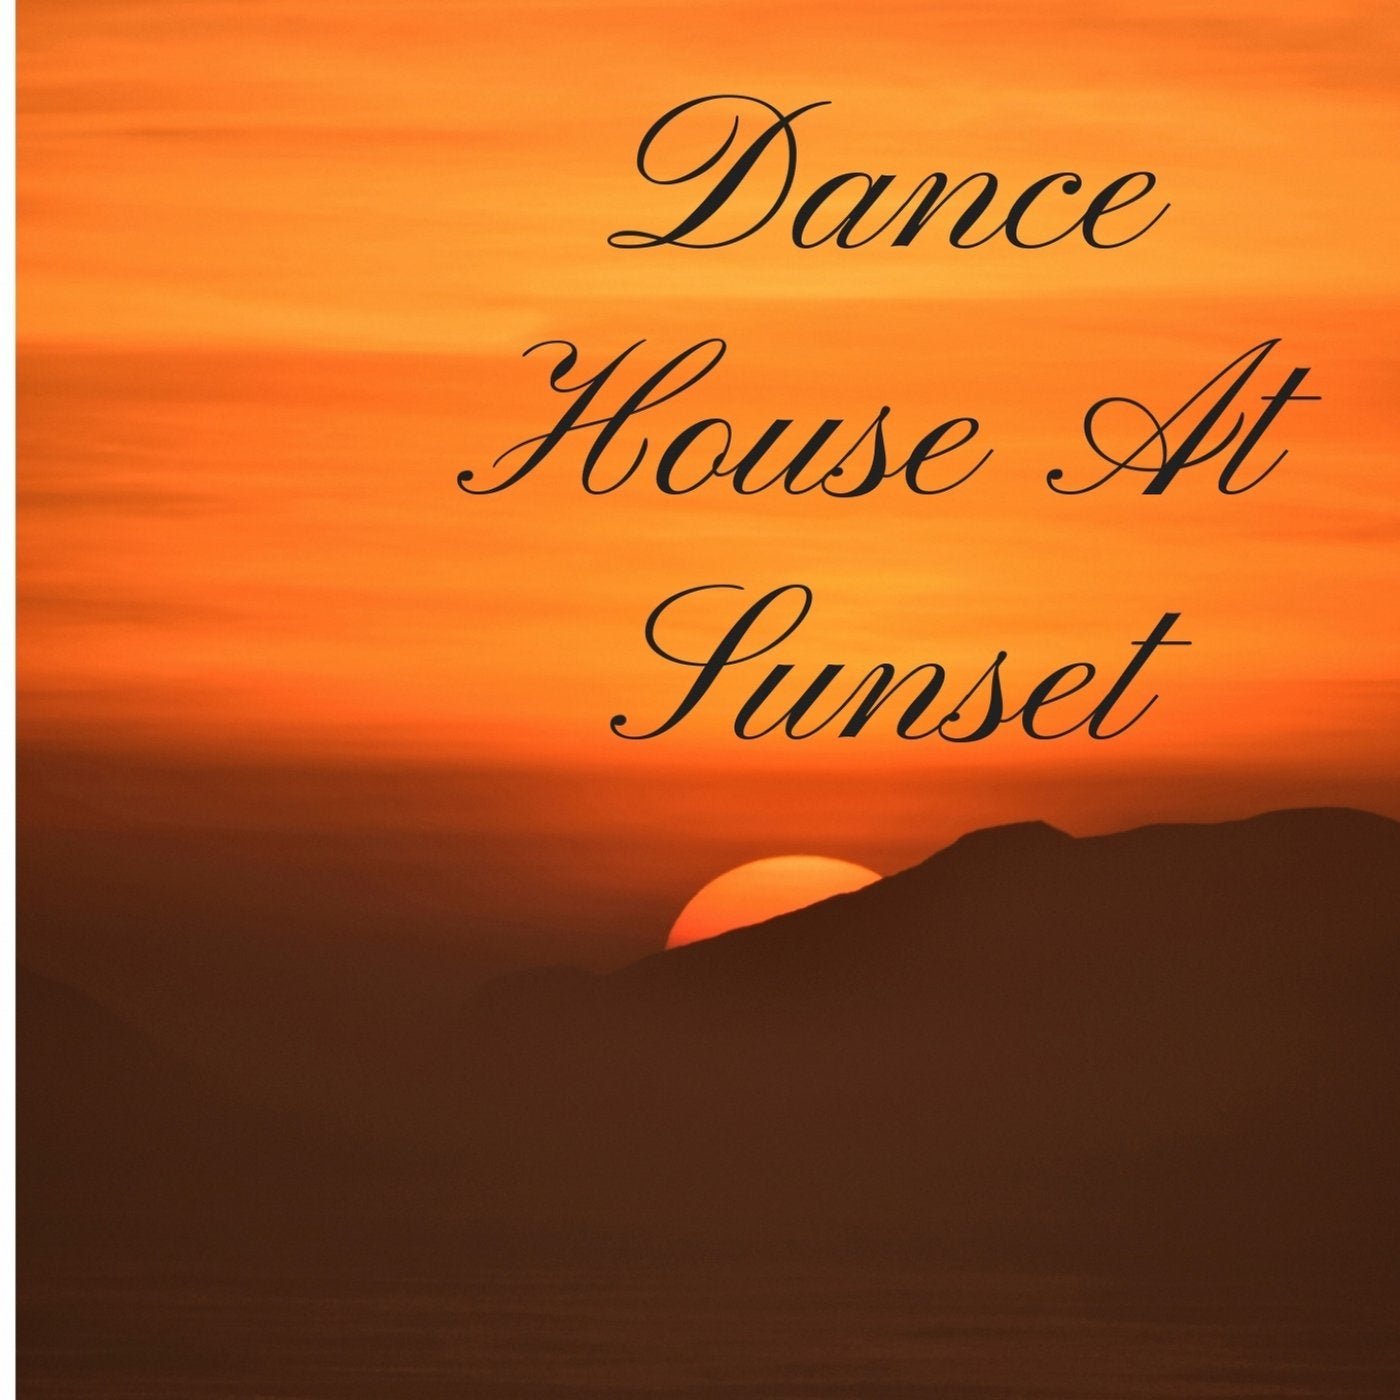 DANCE HOUSE AT SUNSET